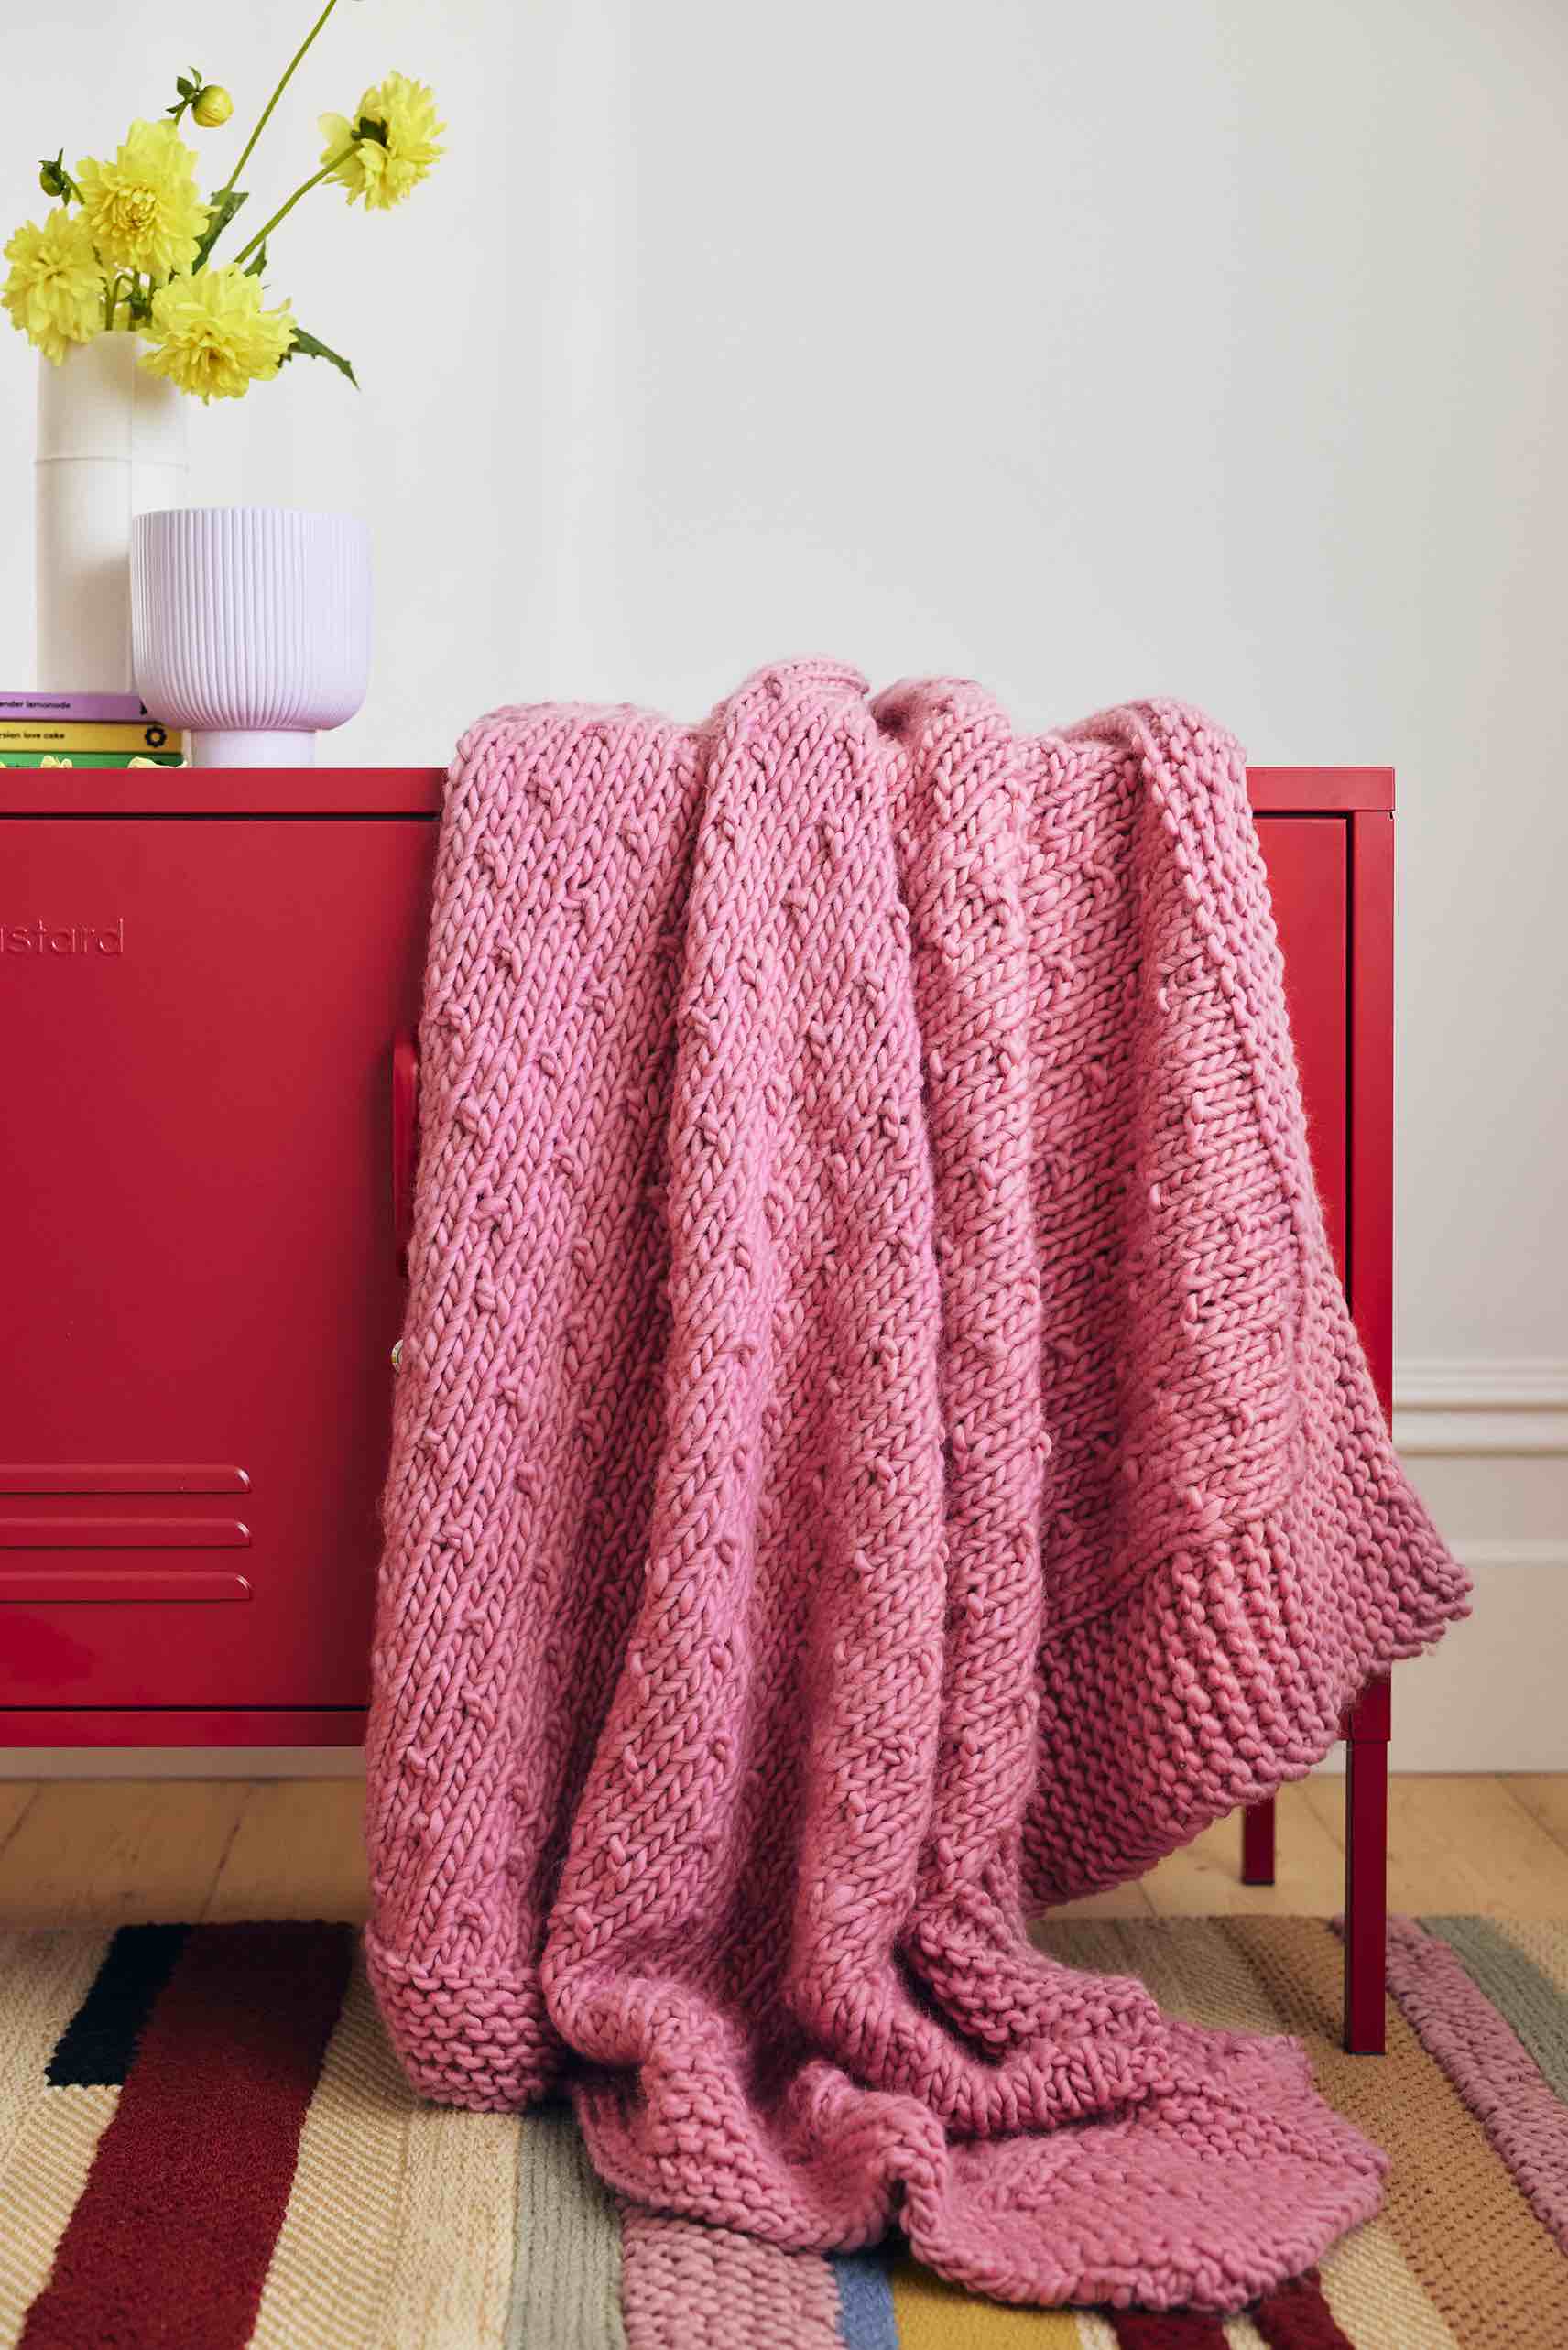 Your step-by-step guide to knitting The Pearl Blanket – Cardigang